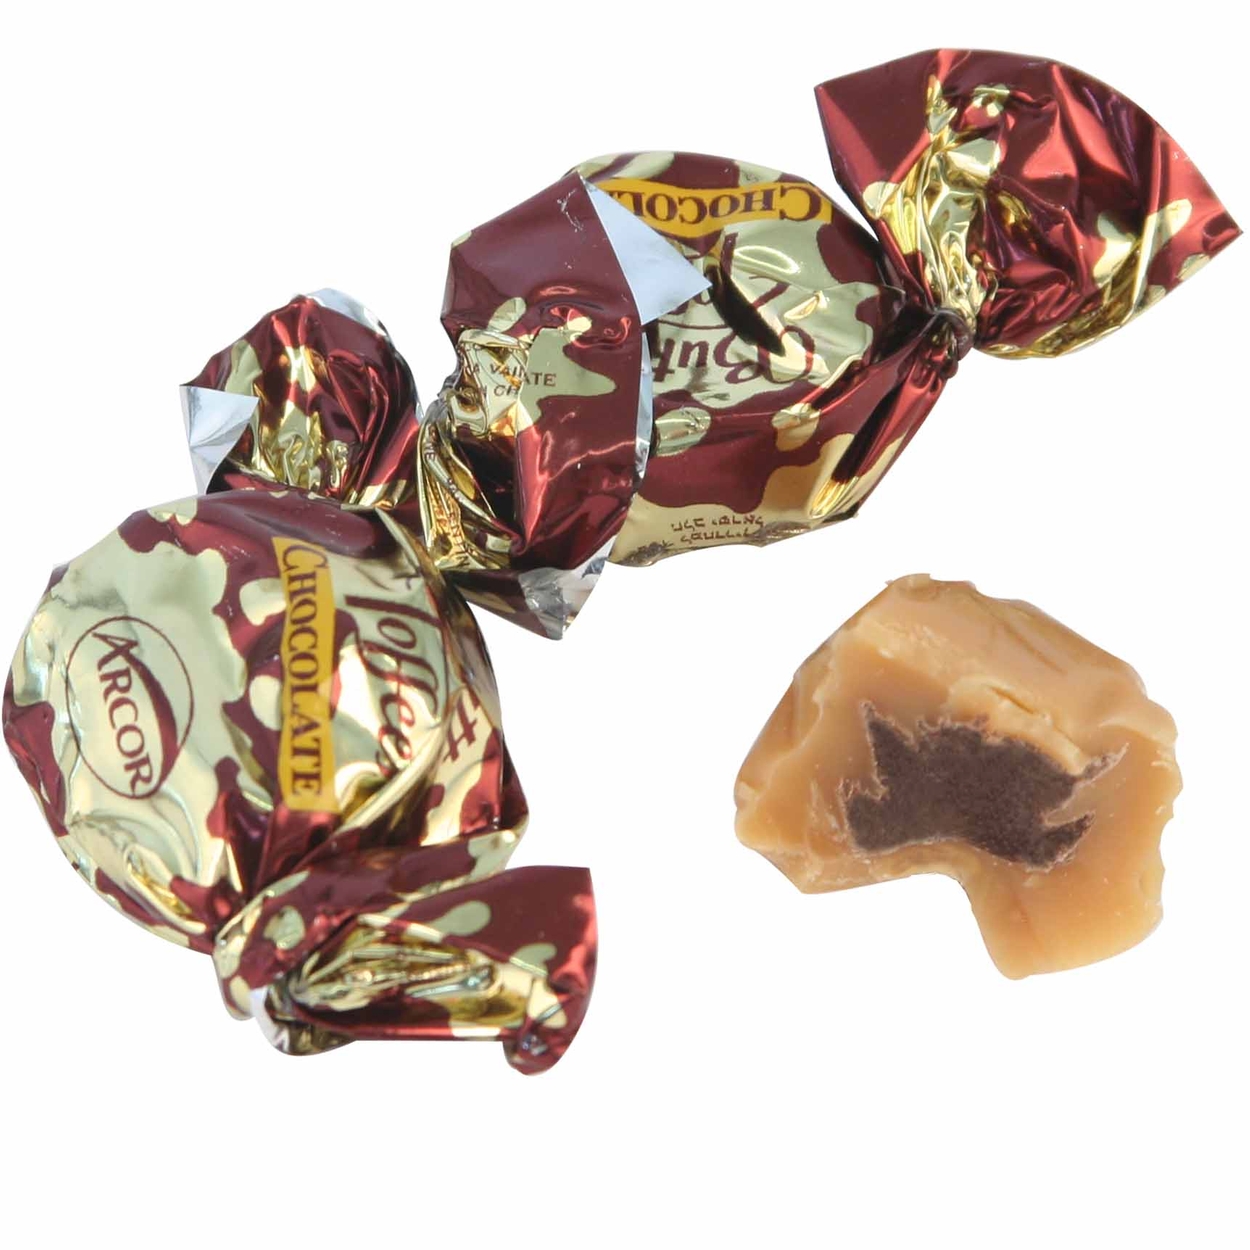 Arcor Chocolate Butter Toffee Candy Bulk Toffee Candy Oh Nuts